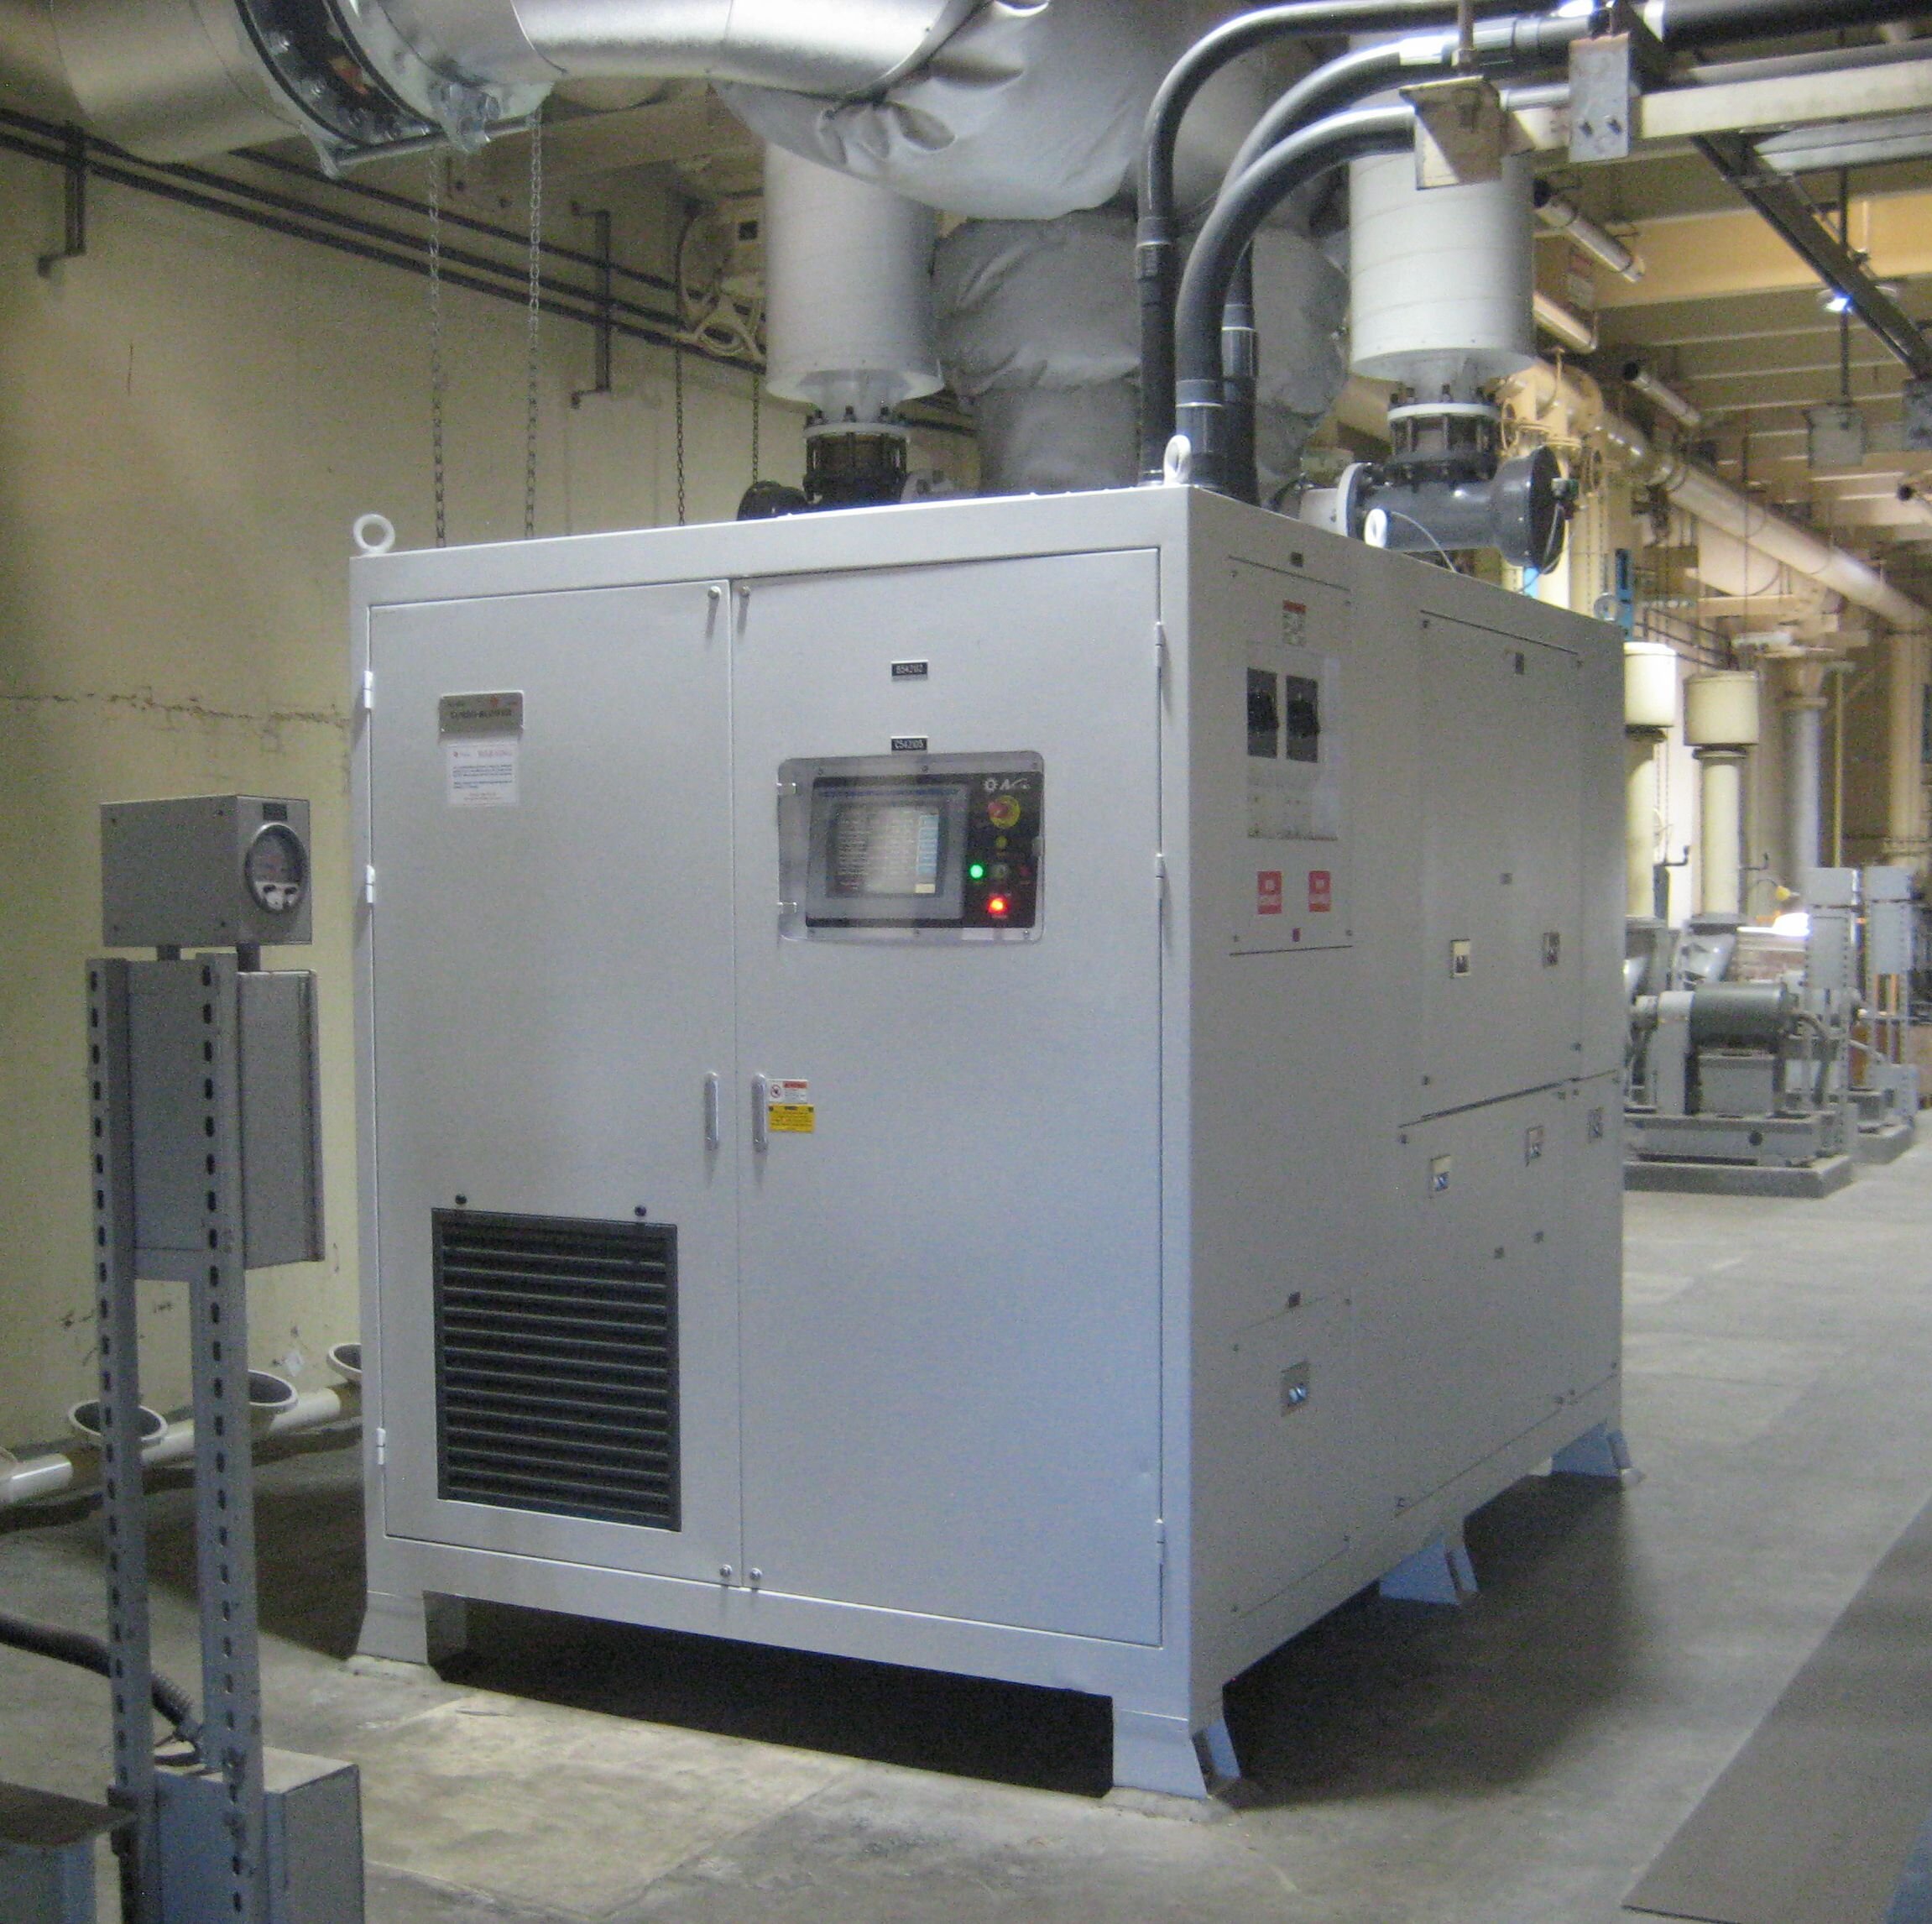 Existing Blower 12 Facing South.JPG